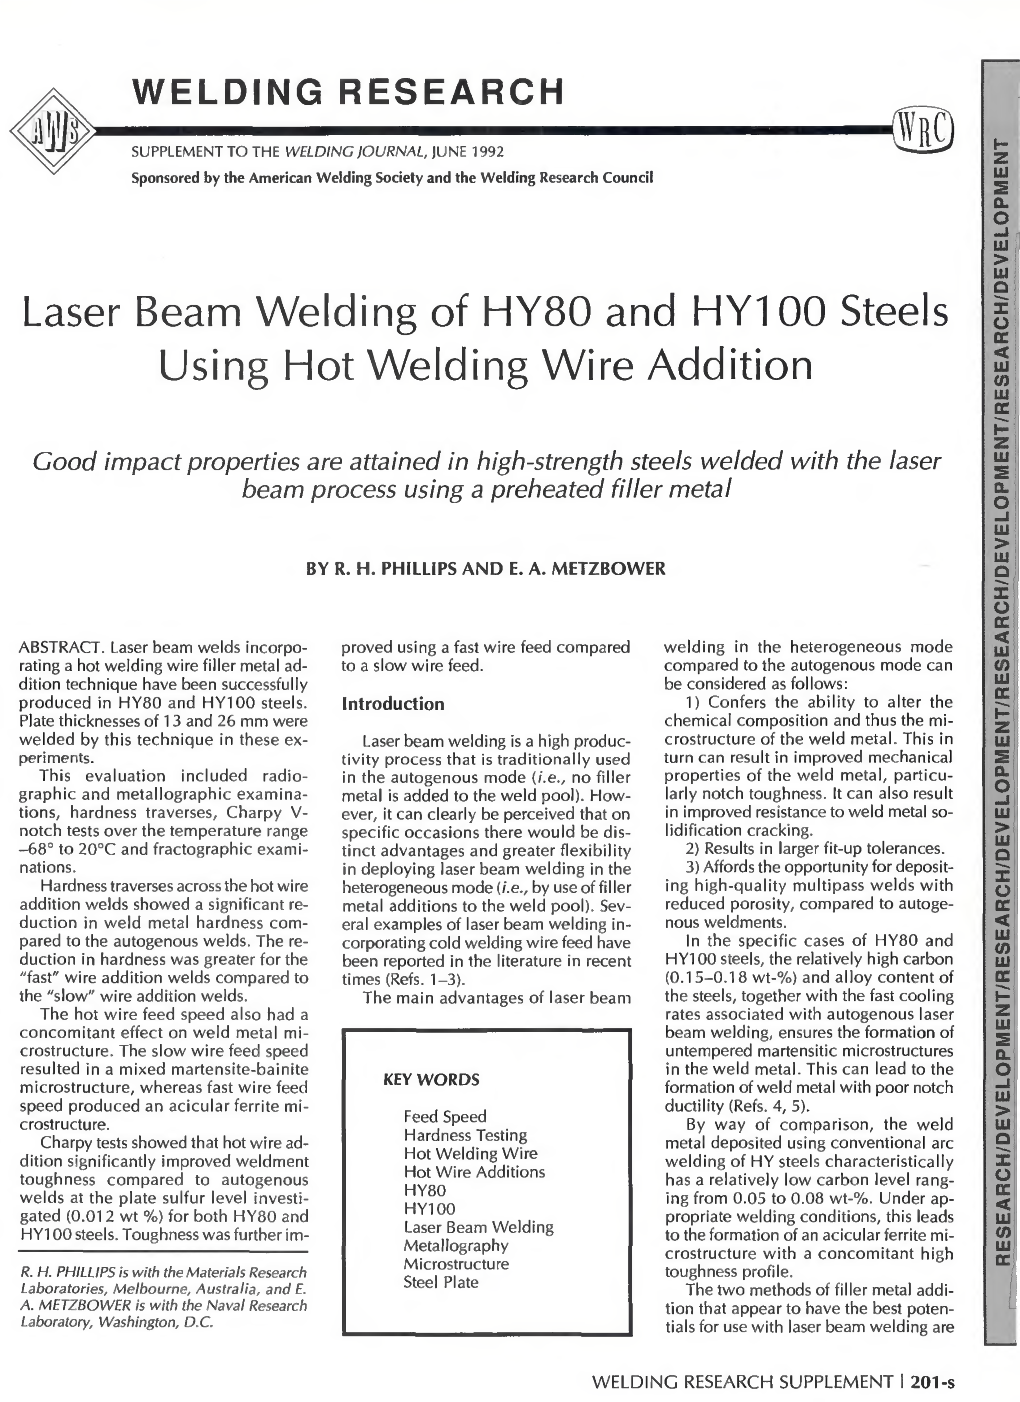 Laser Beam Welding of HY80 and HY100 Steels Using Hot Welding Wire Addition